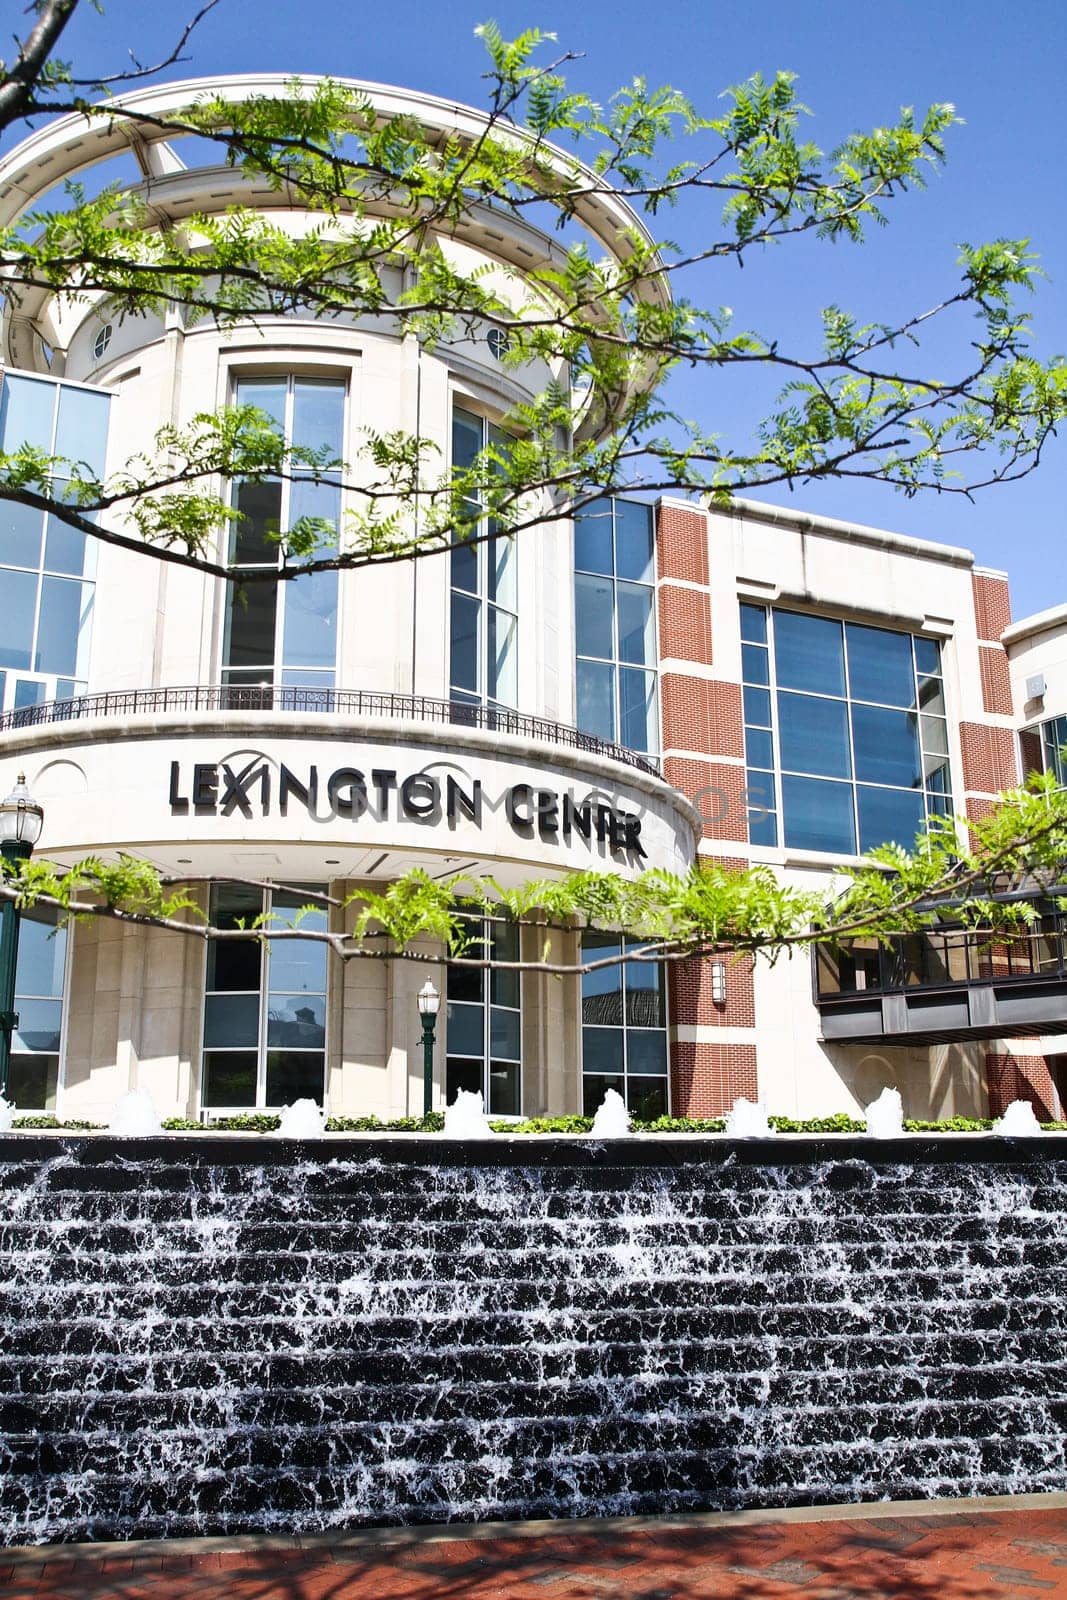 Lexington Center: A stunning modern architectural marvel with a curved glass feature and vibrant cream and brick red facade. The center's name shines on a metallic sign, while a captivating water feature adds a touch of natural serenety.